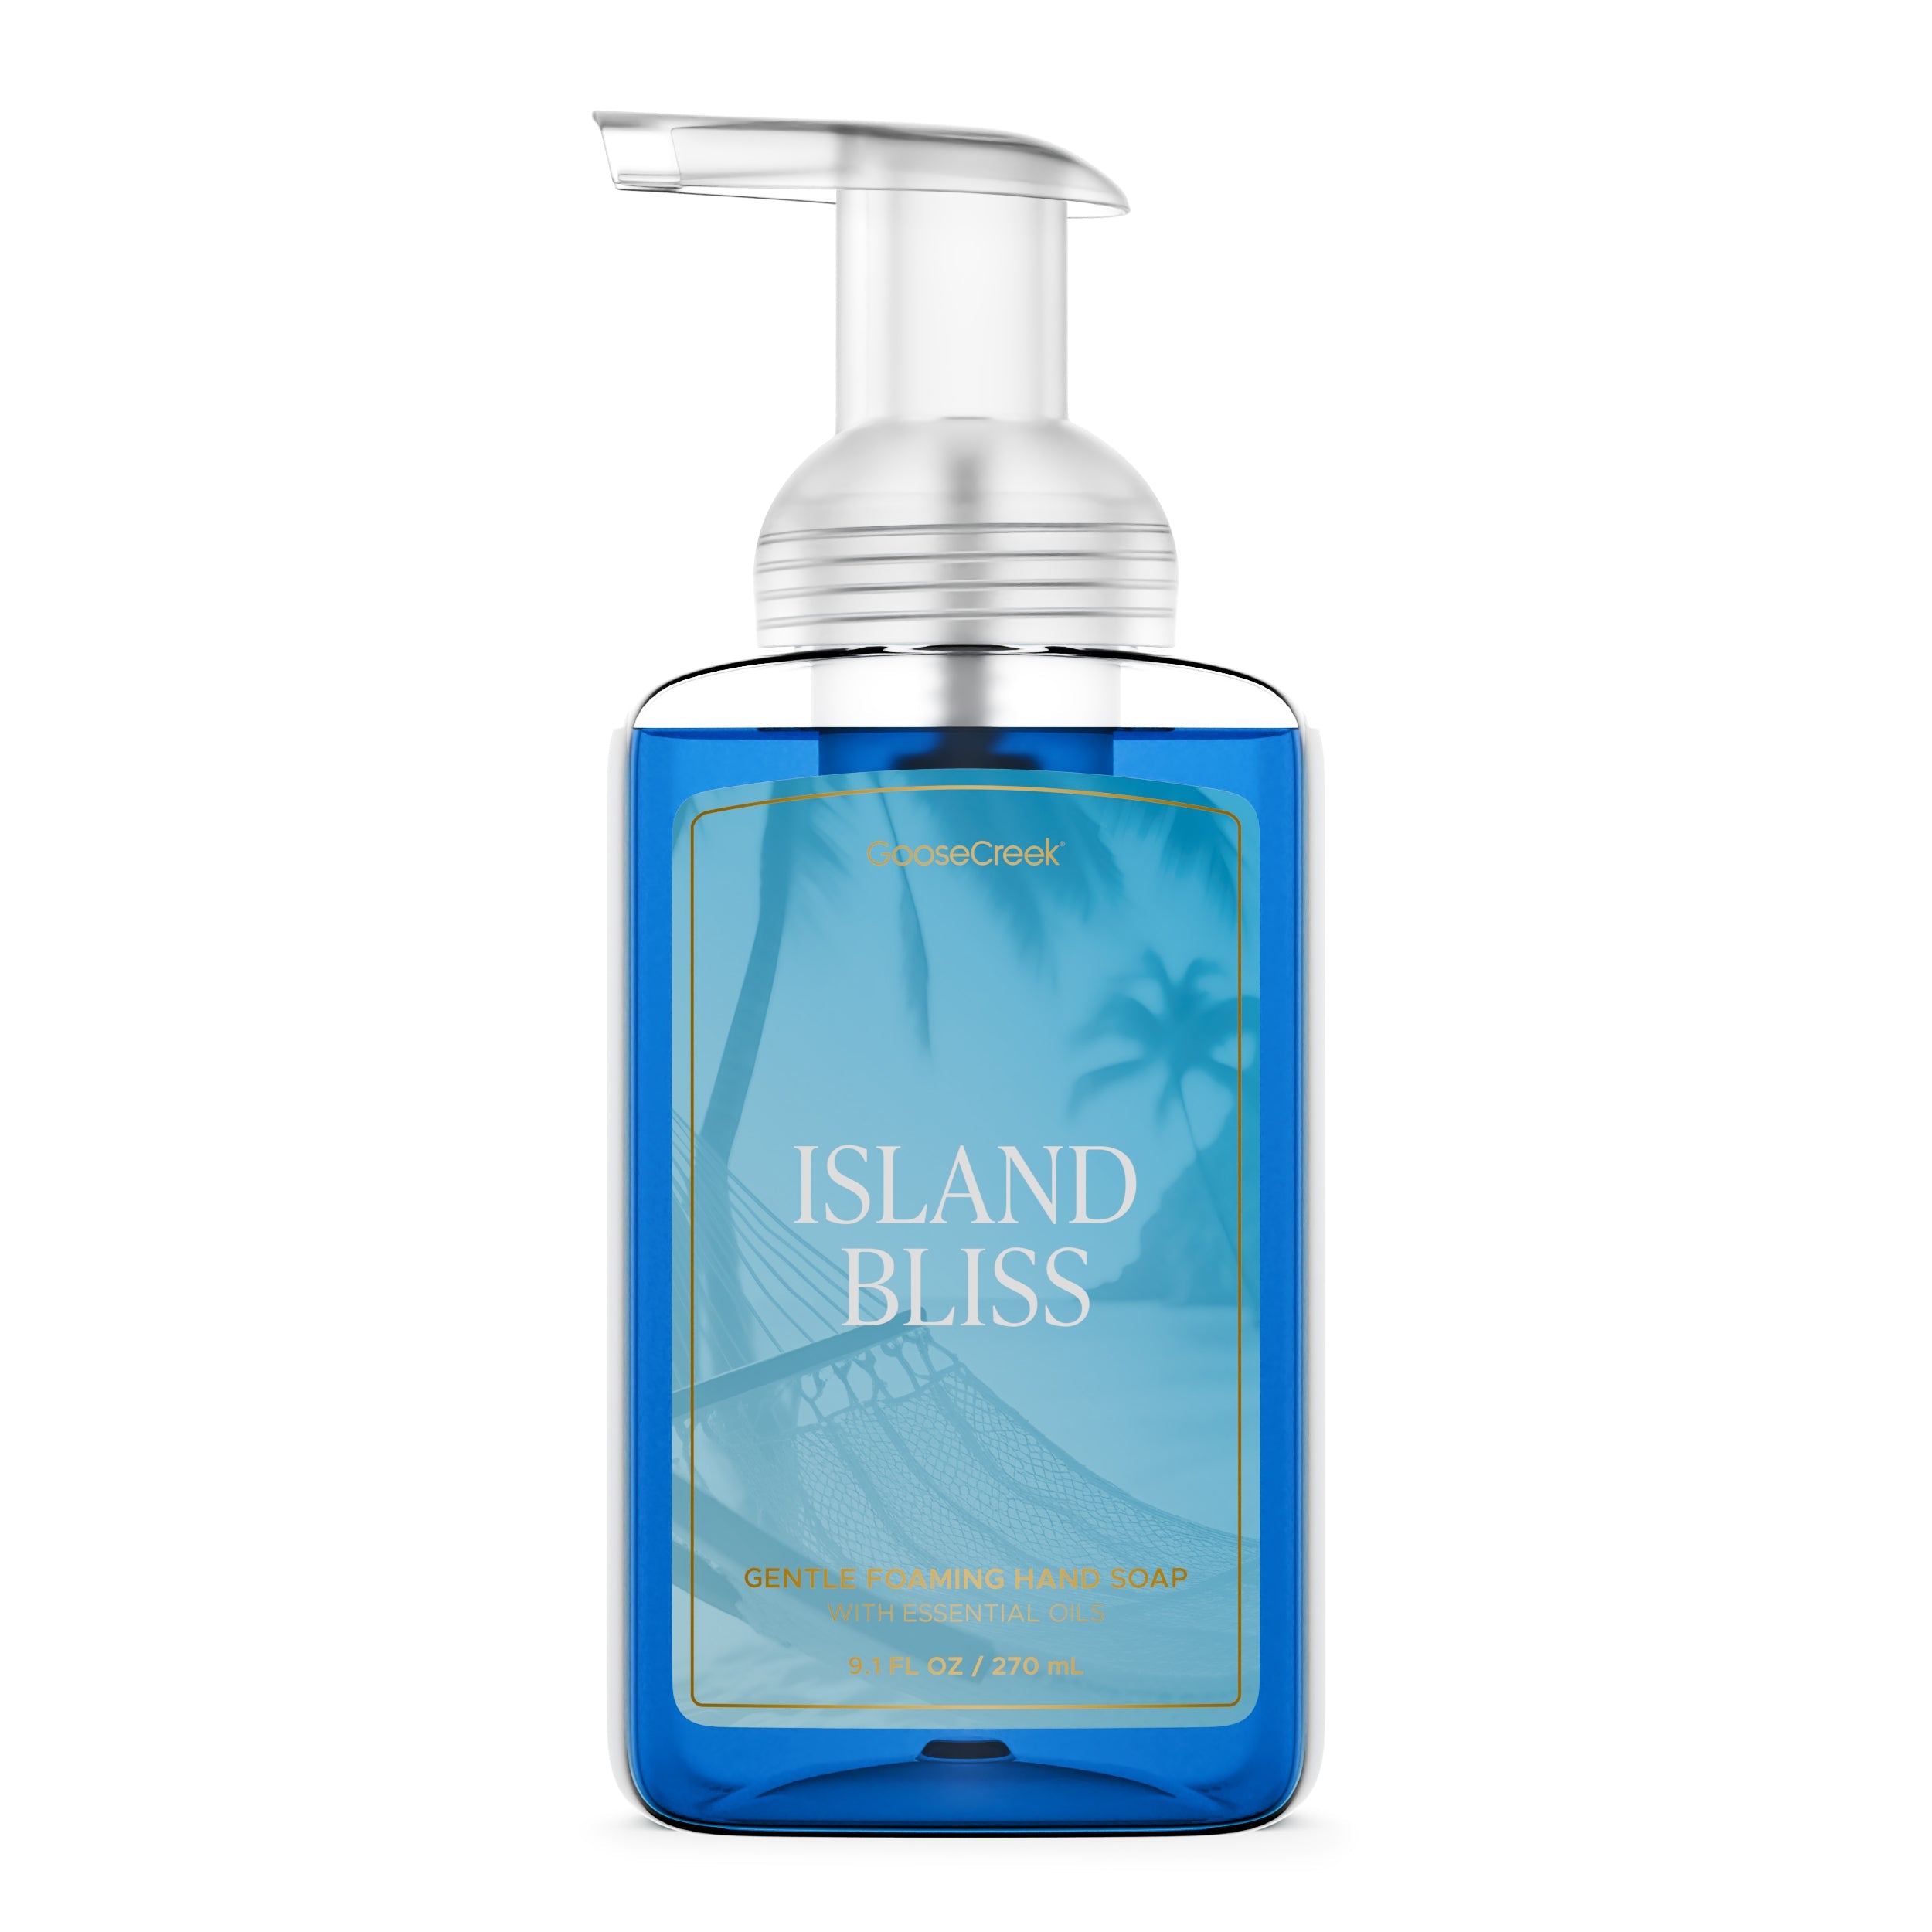 Image of Island Bliss Lush Foaming Hand Soap